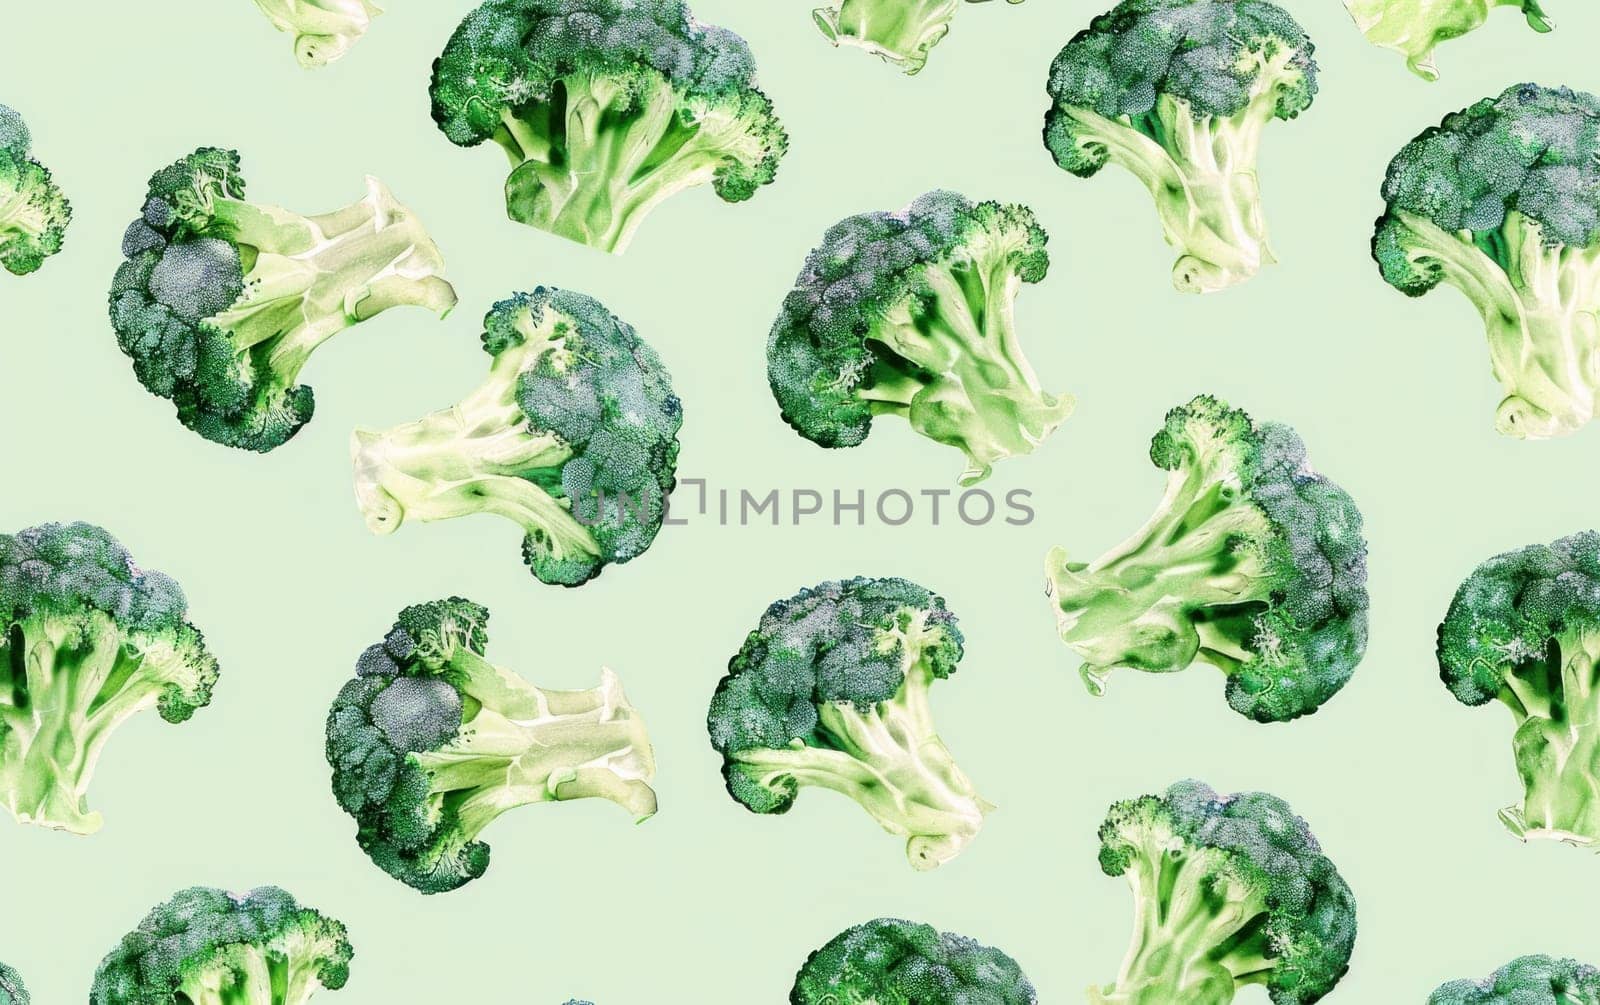 Green broccoli seamless pattern on light background with white accents for kitchen and food related designs